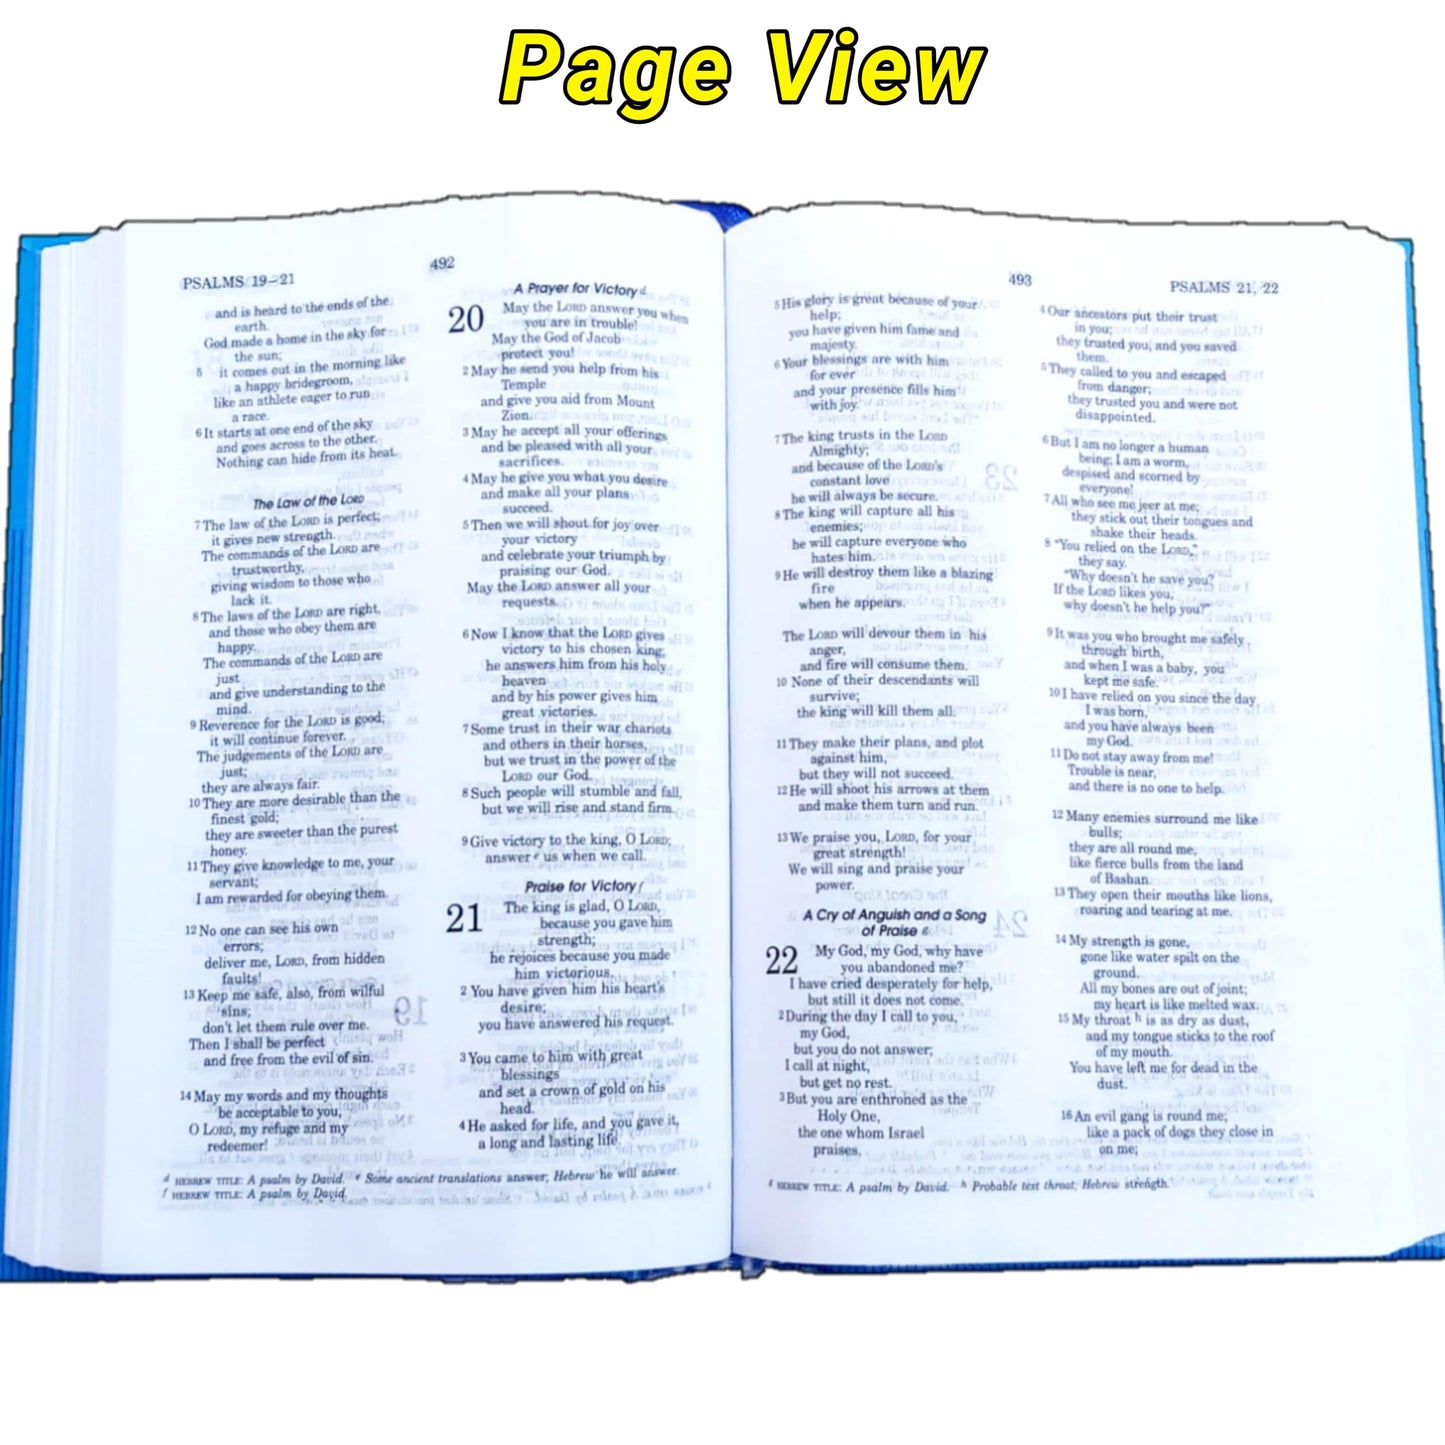 The Holy Bible Good News Compact Edition Blue Color ( Today's English Version )